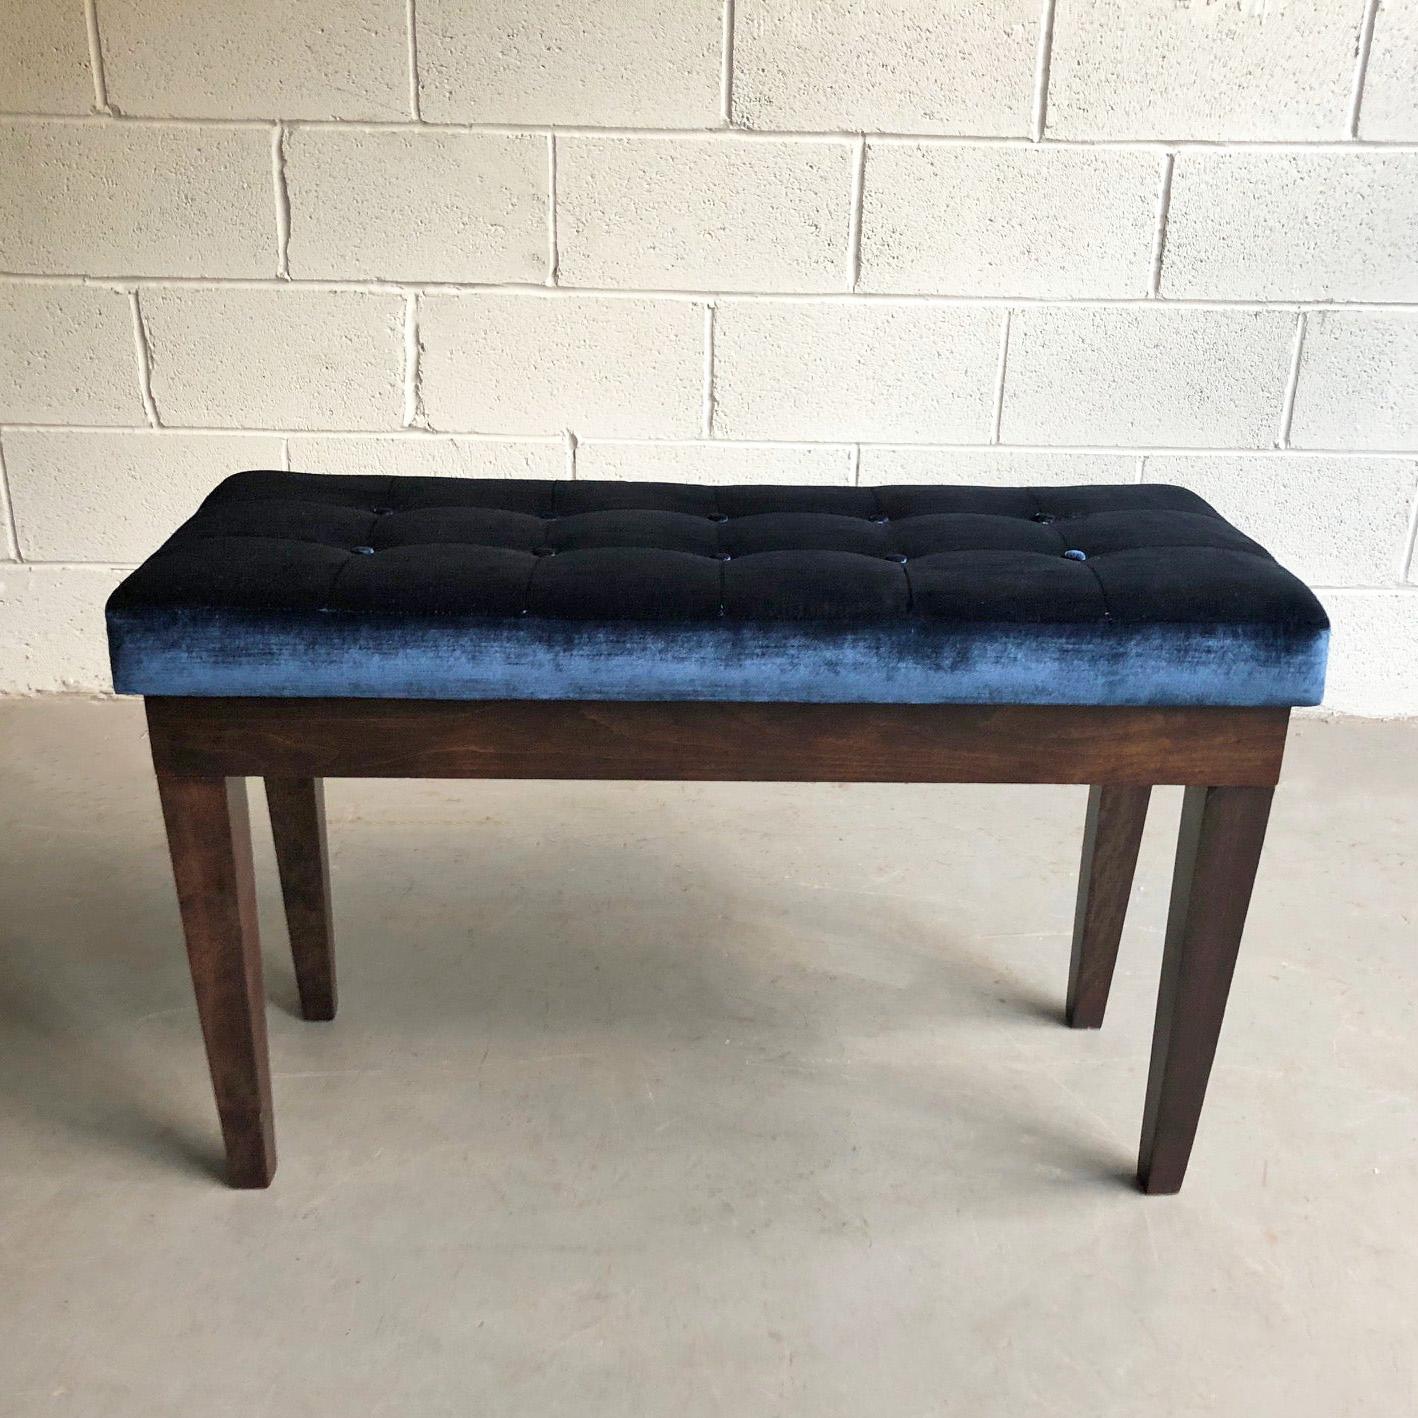 Hollywood Regency, piano storage bench features a walnut frame with a deep blue velvet tufted seat. The bench when hinged open is 34 inches height.
  